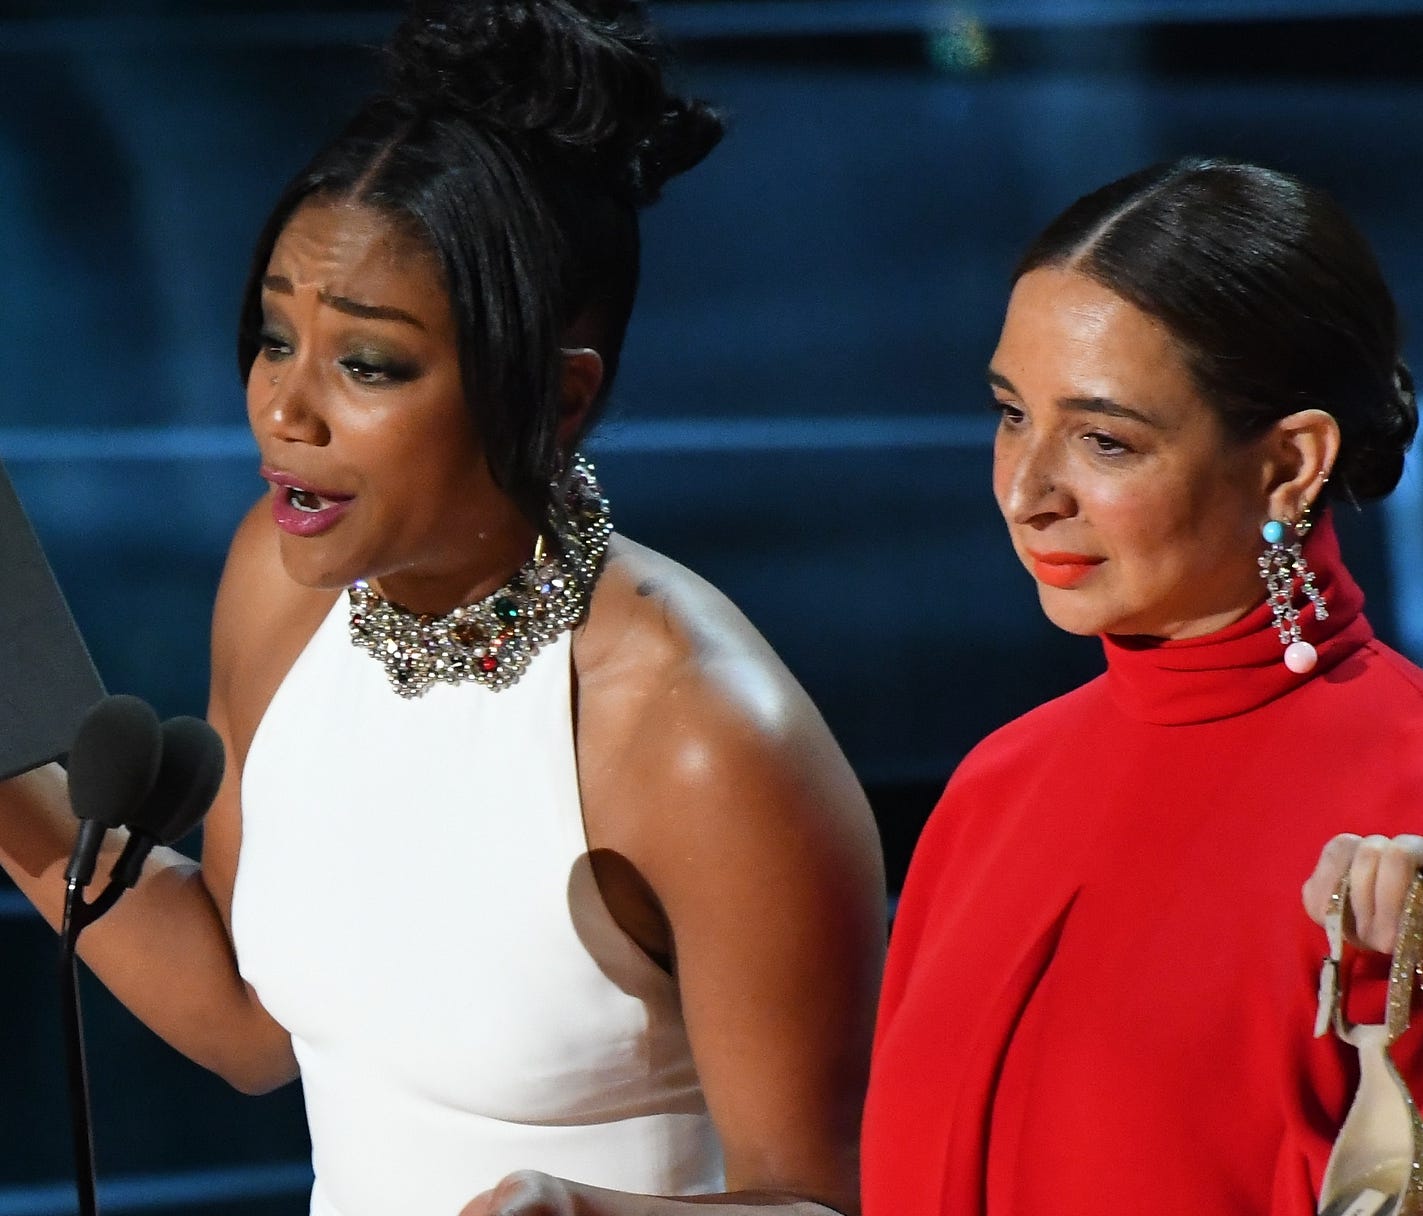 Tiffany Haddish and Maya Rudolph stole the show presenting the Oscar for best documentary short subject.